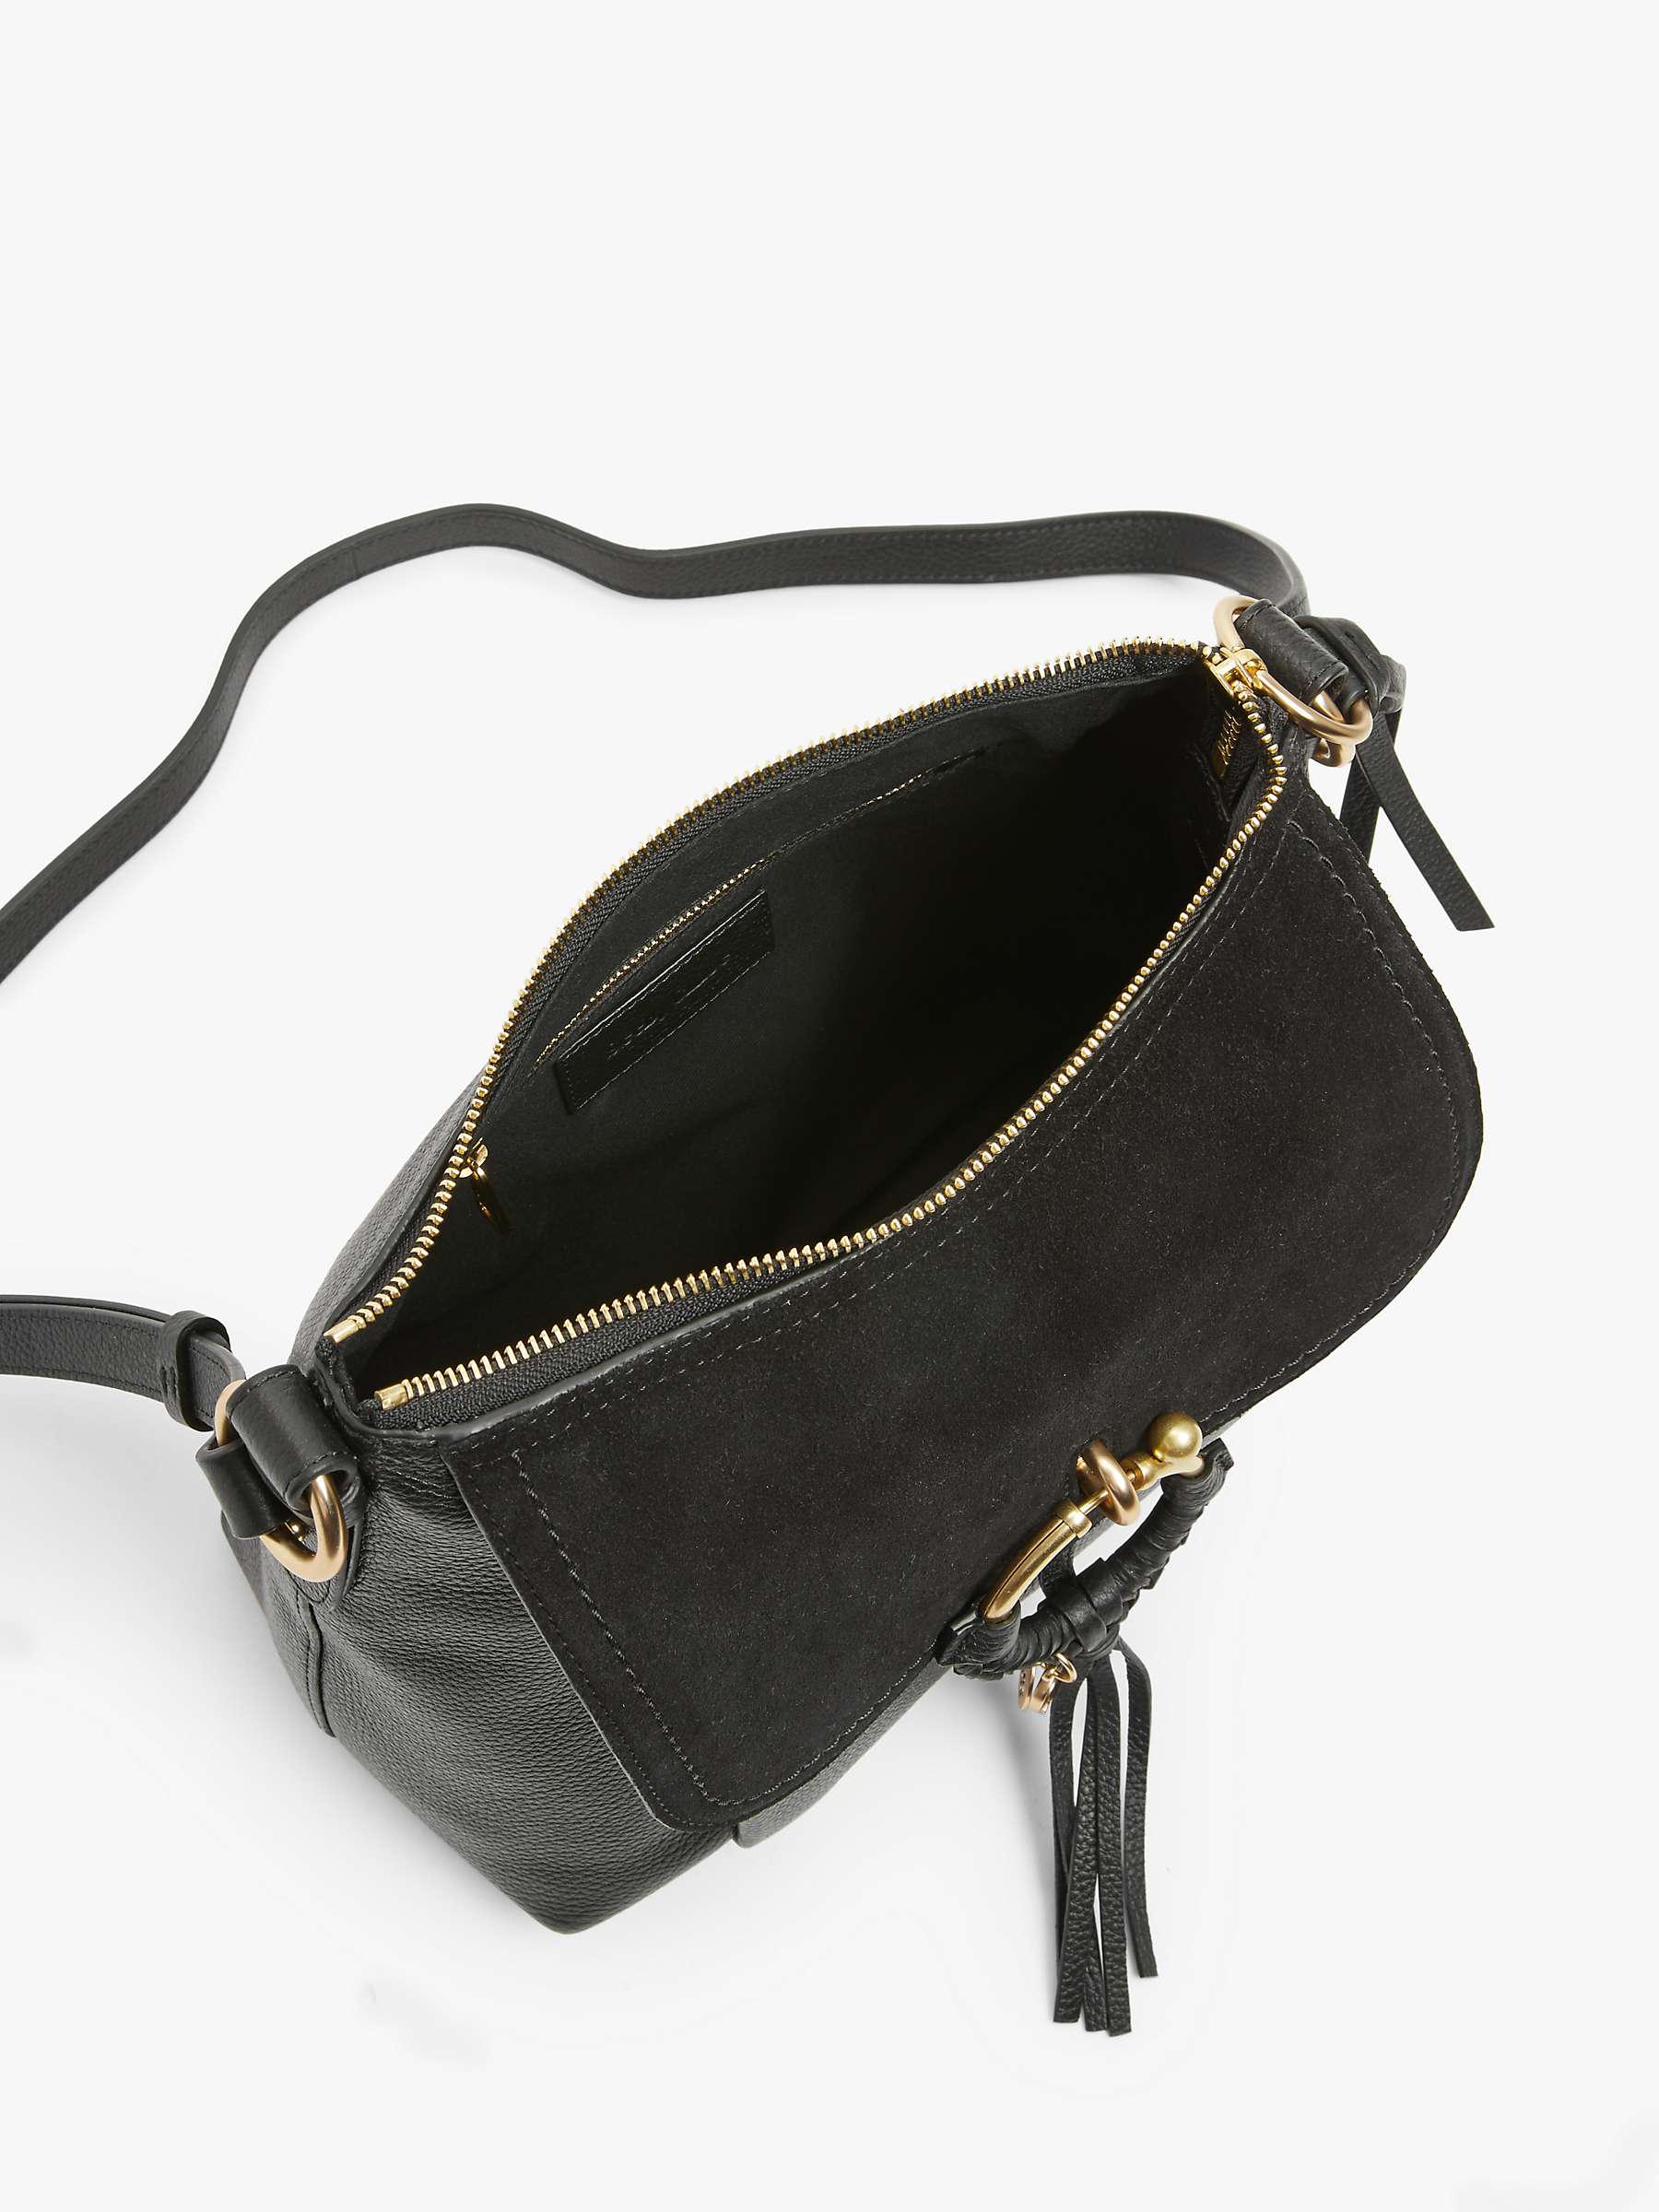 Buy See By Chloé Joan Suede Leather Small Satchel Bag Online at johnlewis.com